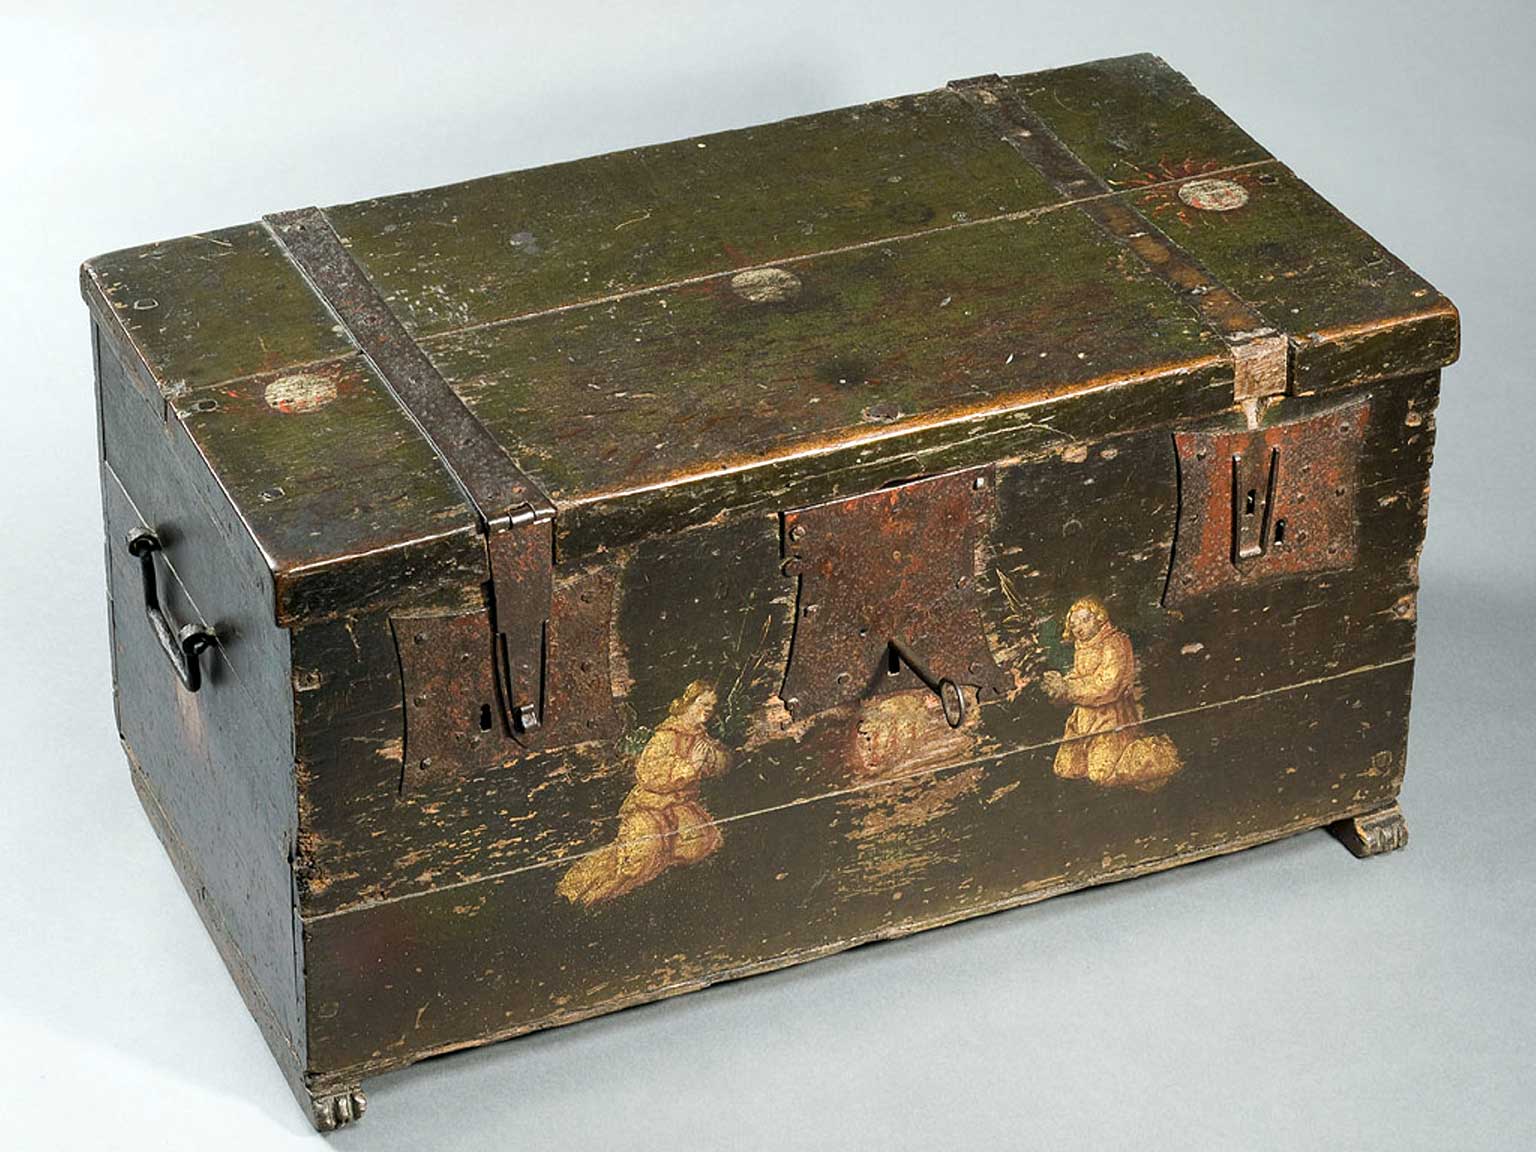 Miracle Chest with angels from between 1500 and 1520, used for archives by Amsterdam's Sacraments Guild